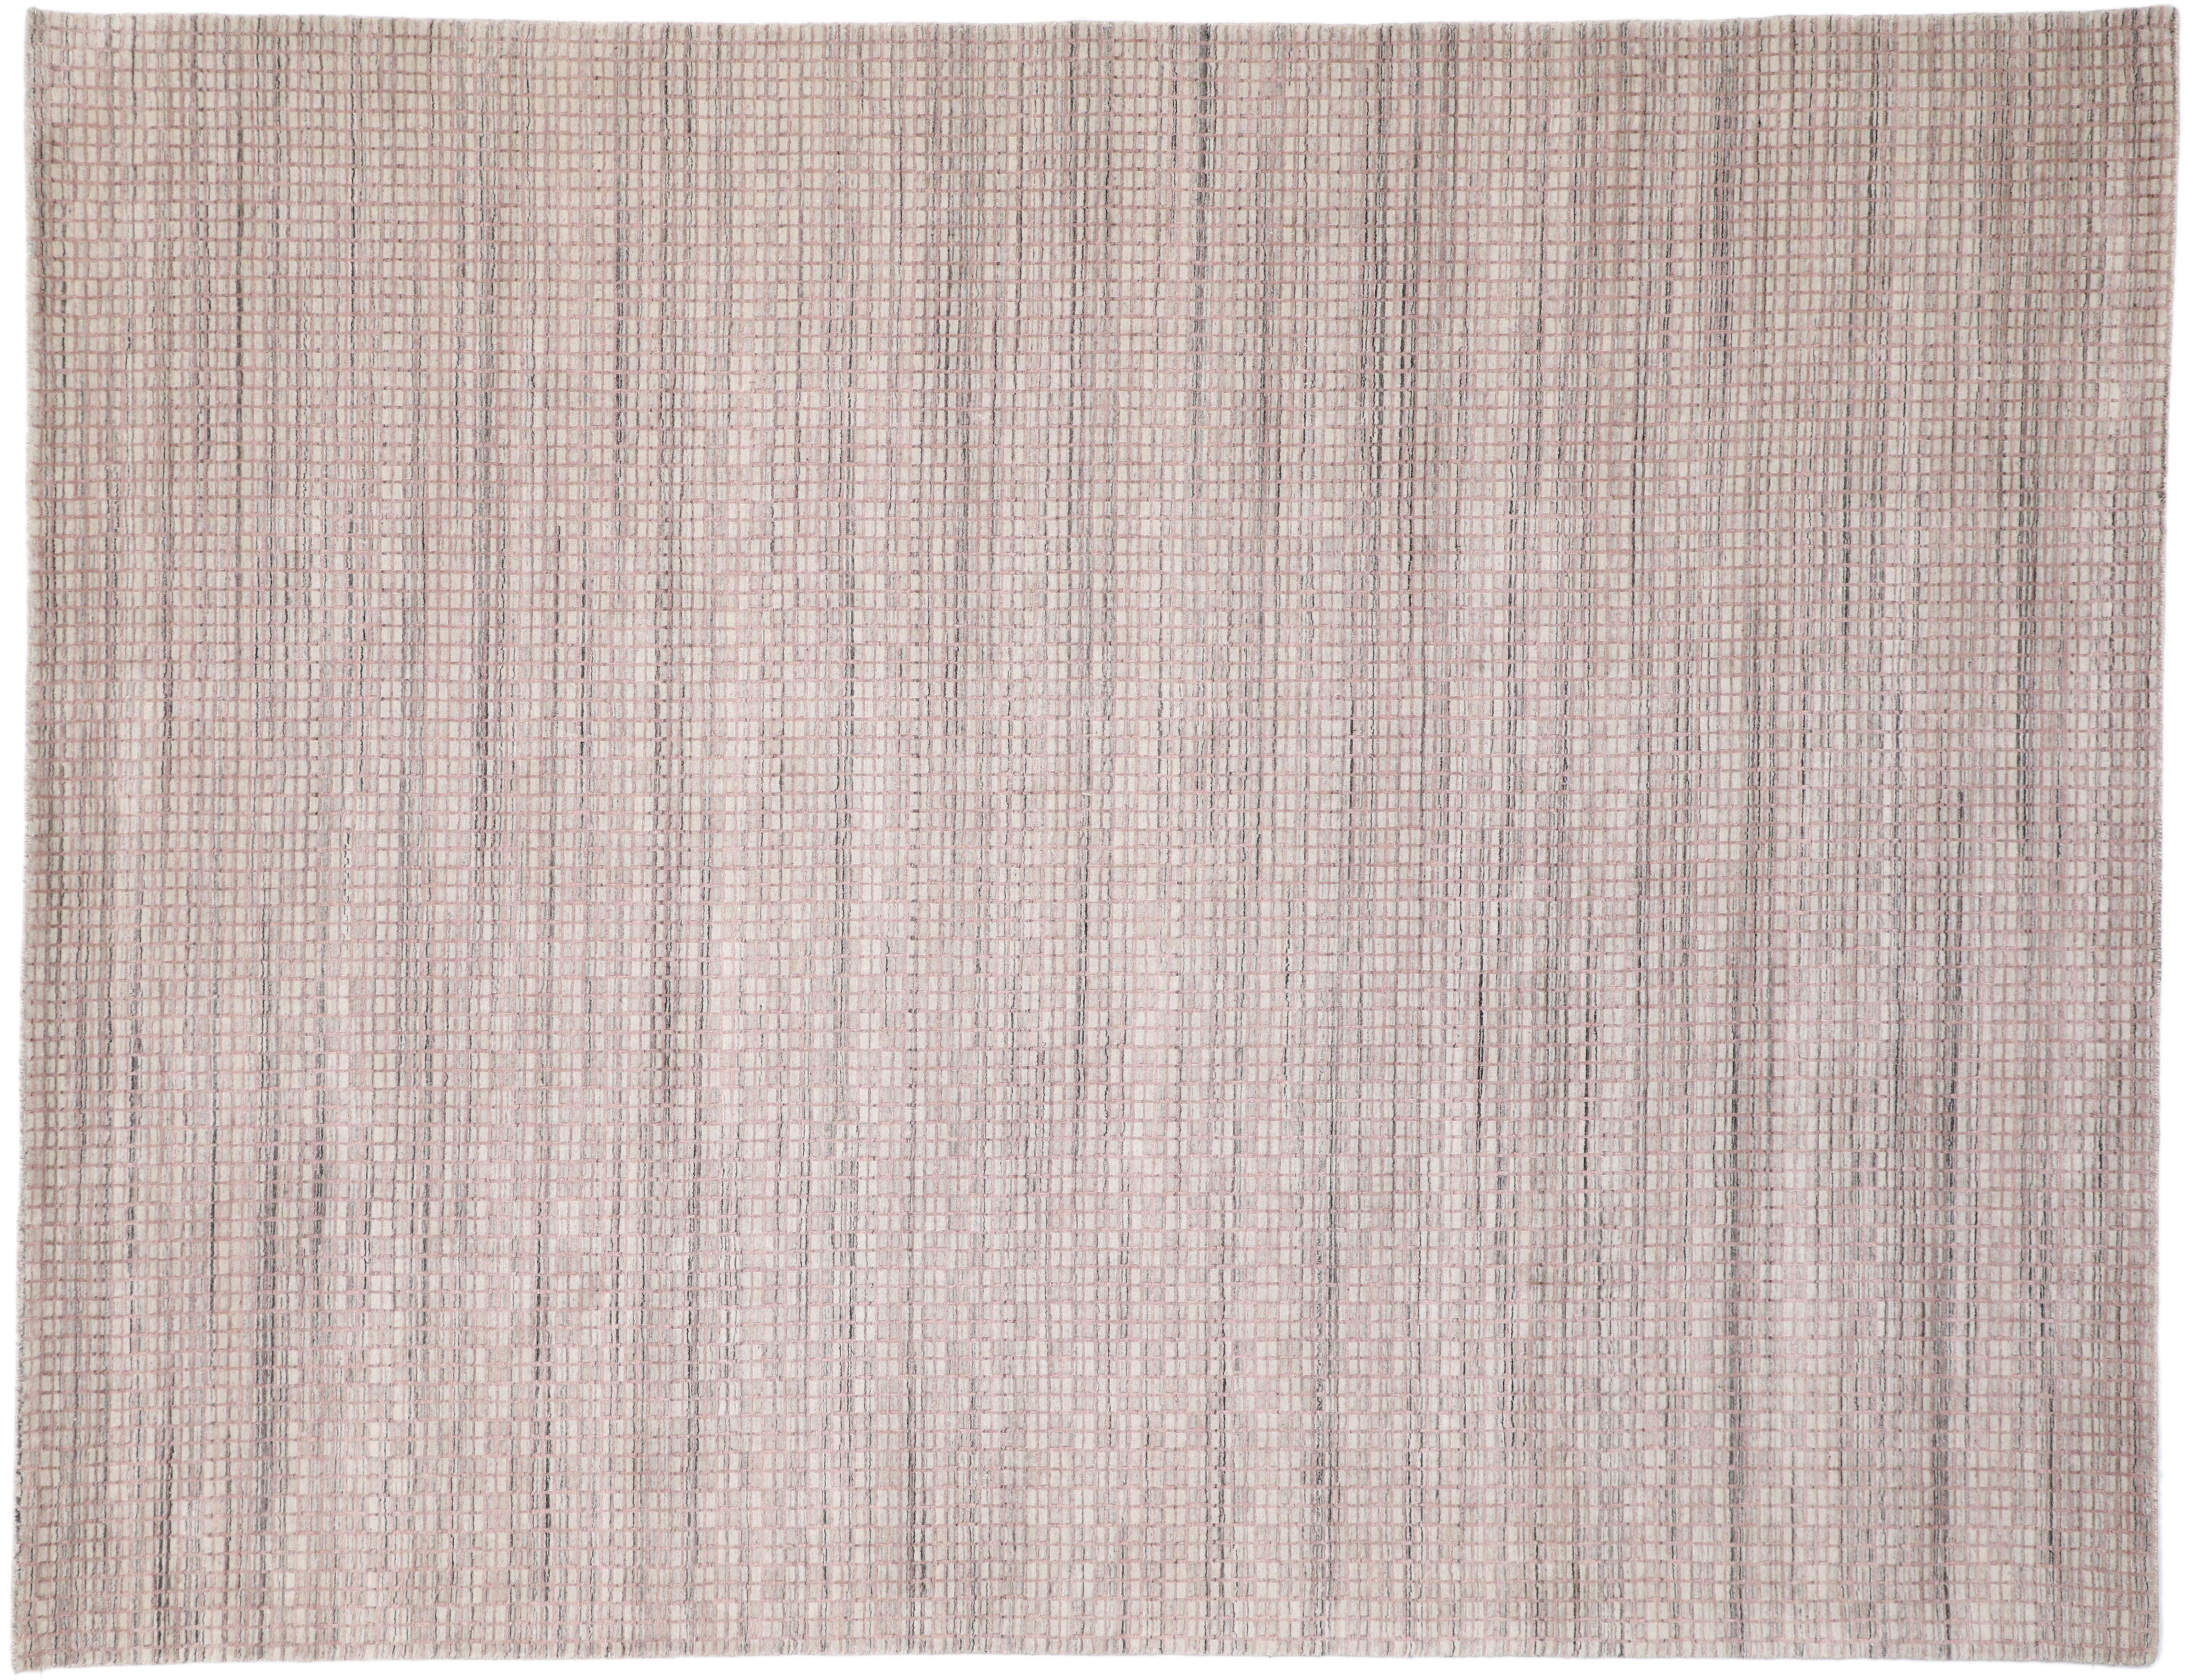 Wool New Transitional Area Rug with Scandinavian Modern Swedish Shabby Chic Style